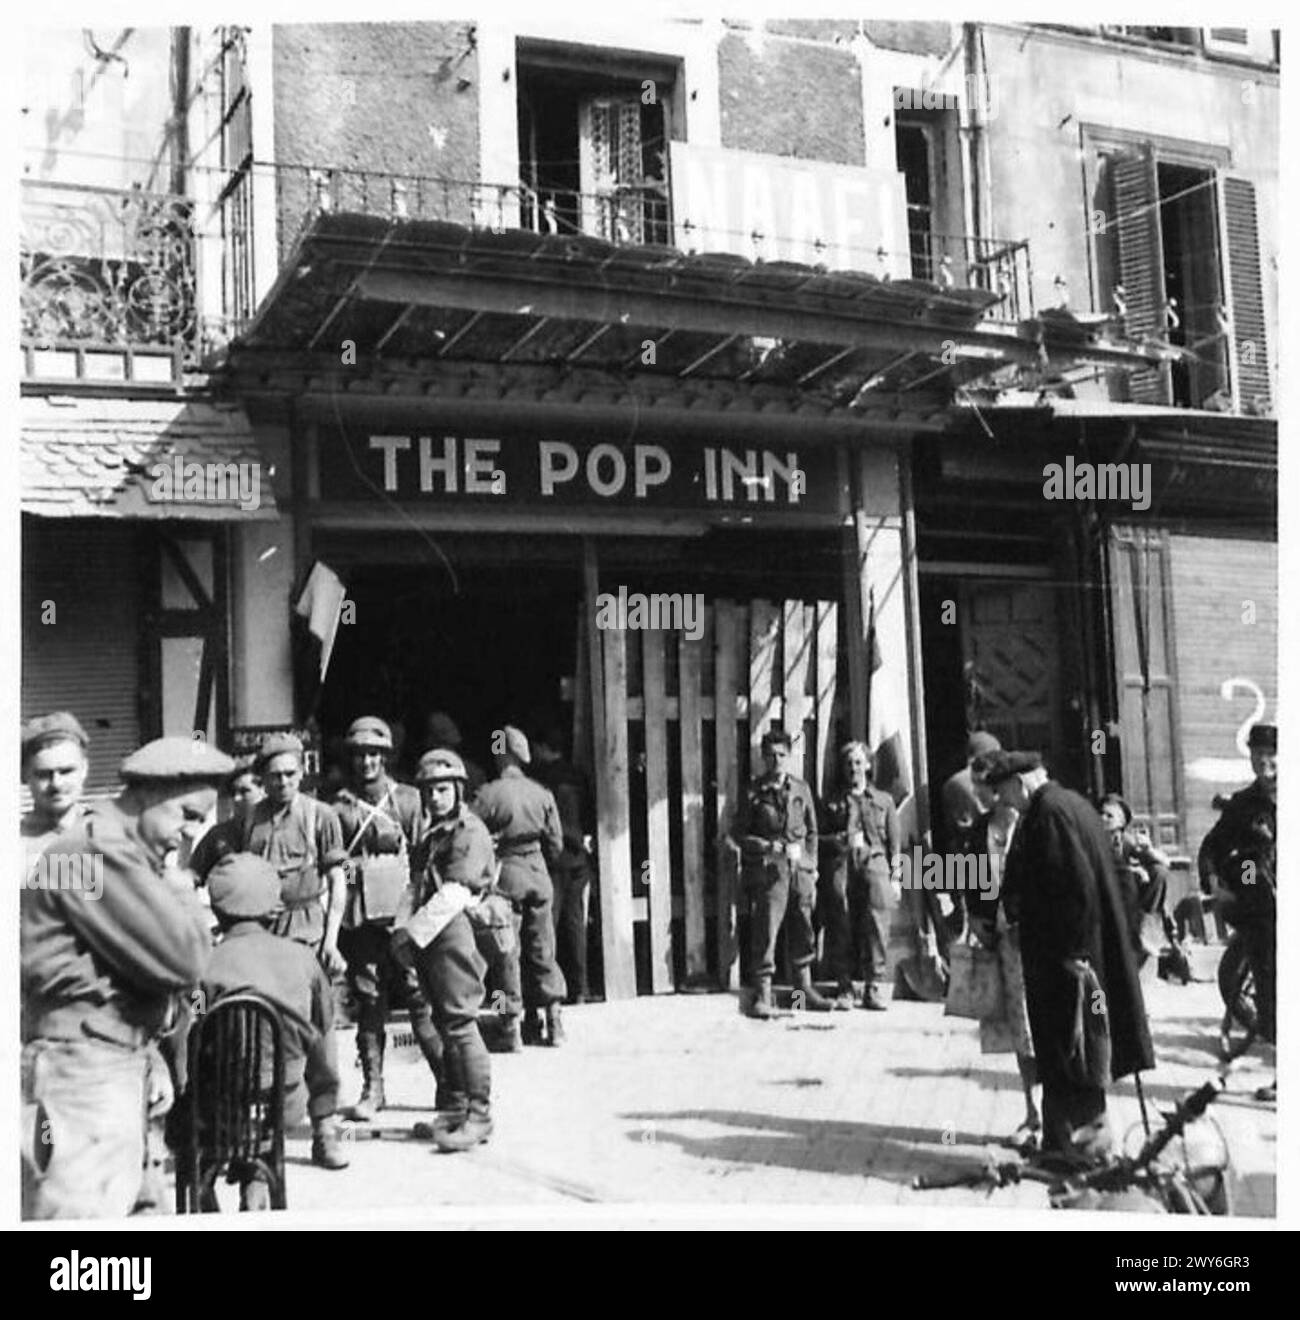 NORMANDY - VARIOUS - Troops are now able to make purchases at the NAAFI in Caen. Here some of them are seen entering The Pop Inn canteen. , British Army, 21st Army Group Stock Photo